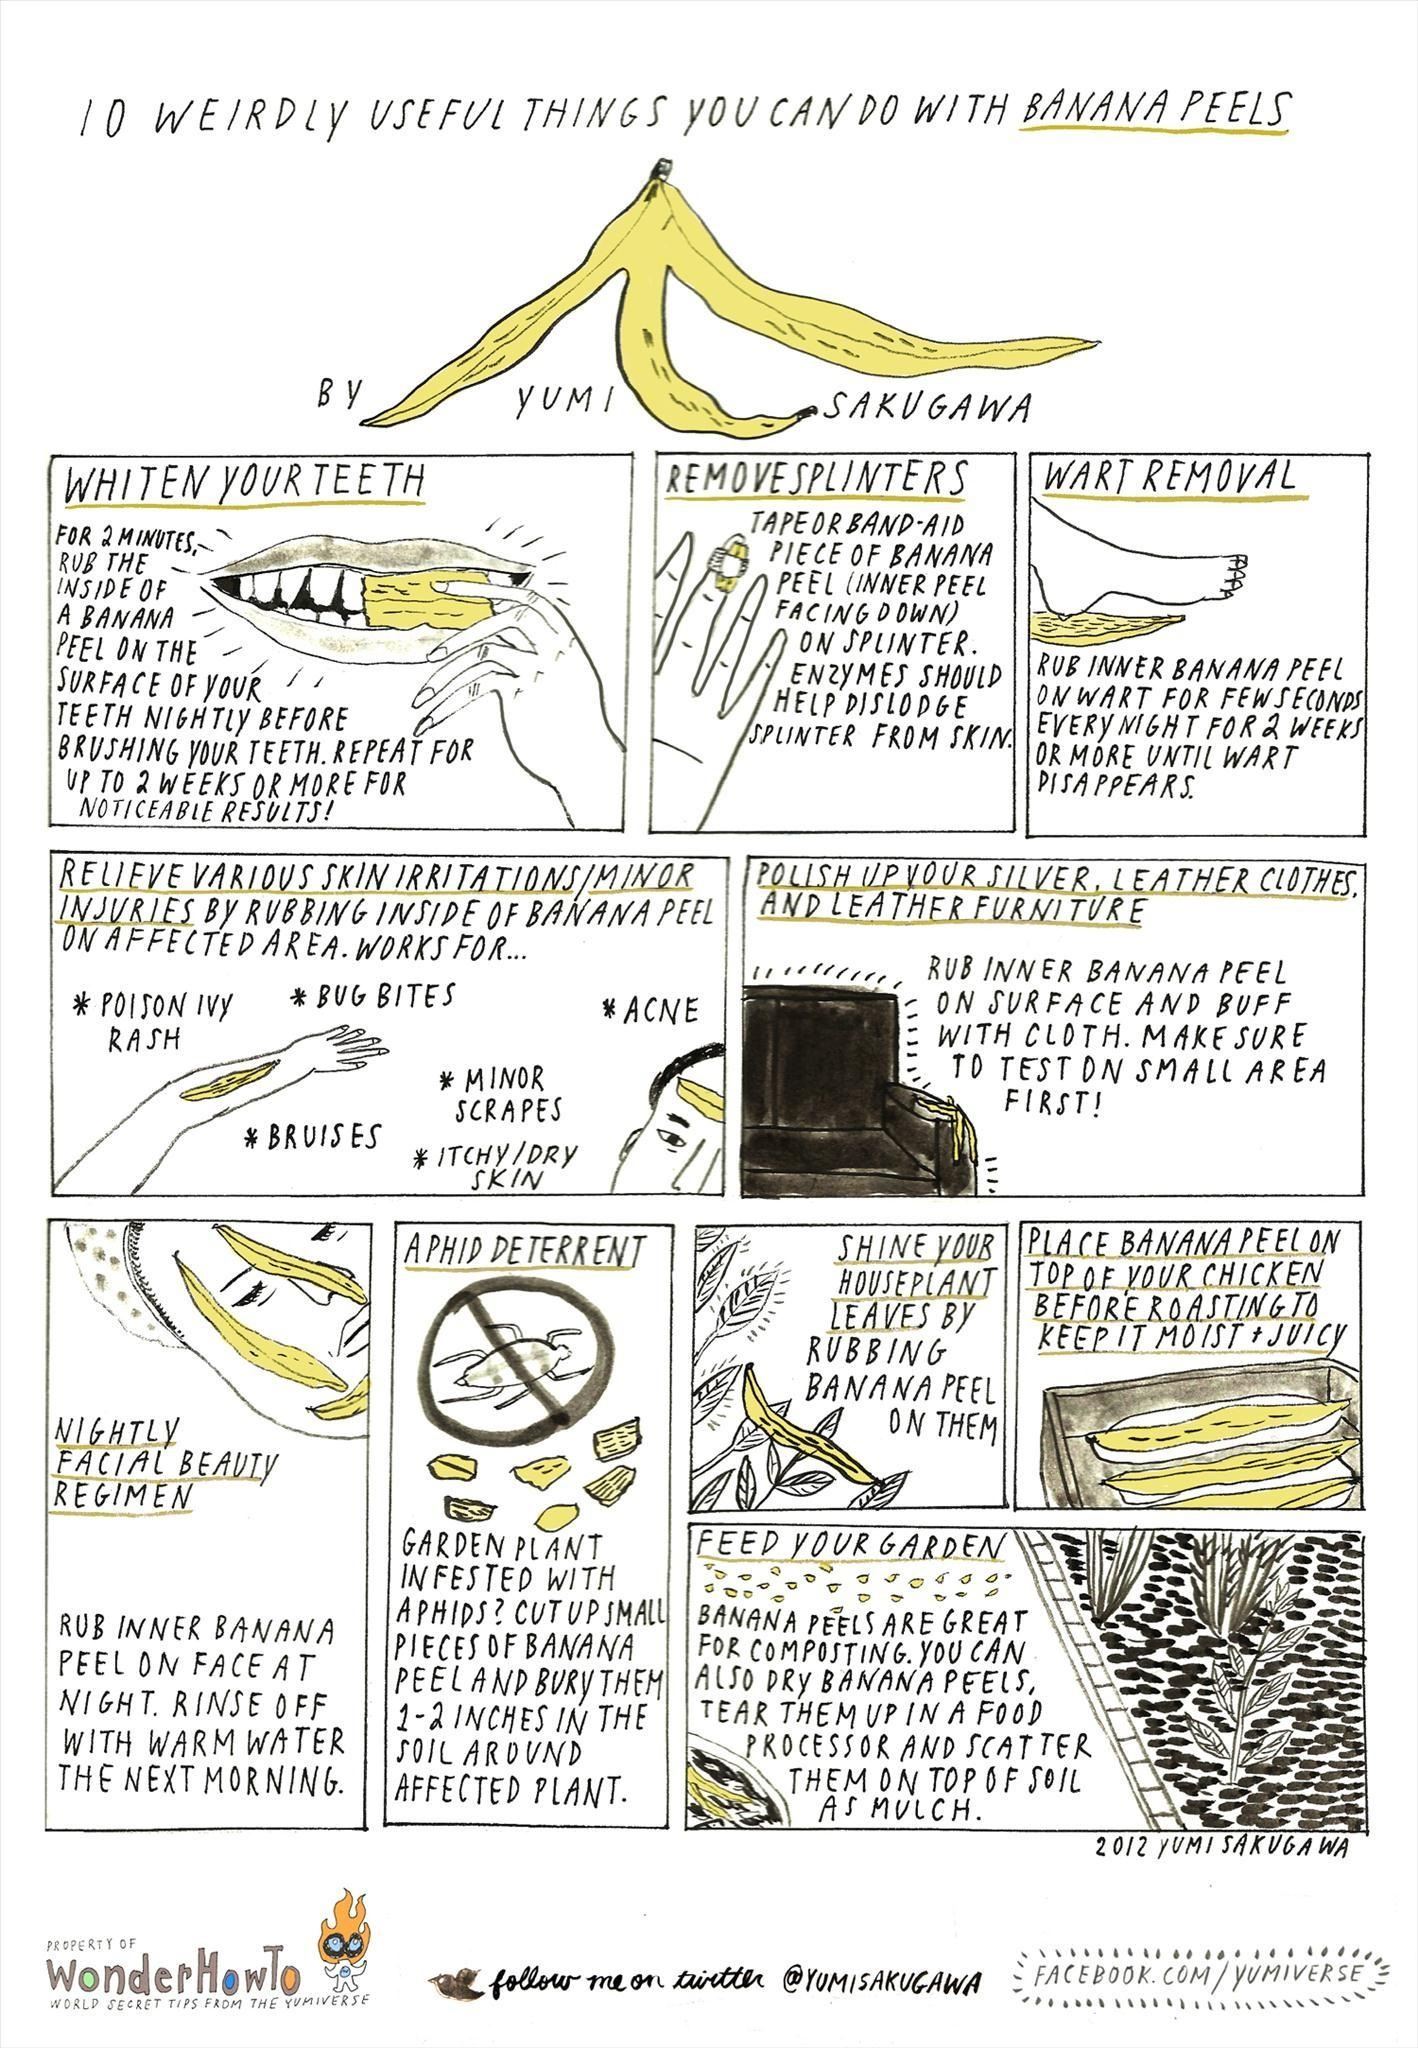 10 Weirdly Useful Things You Can Do with Banana Peels